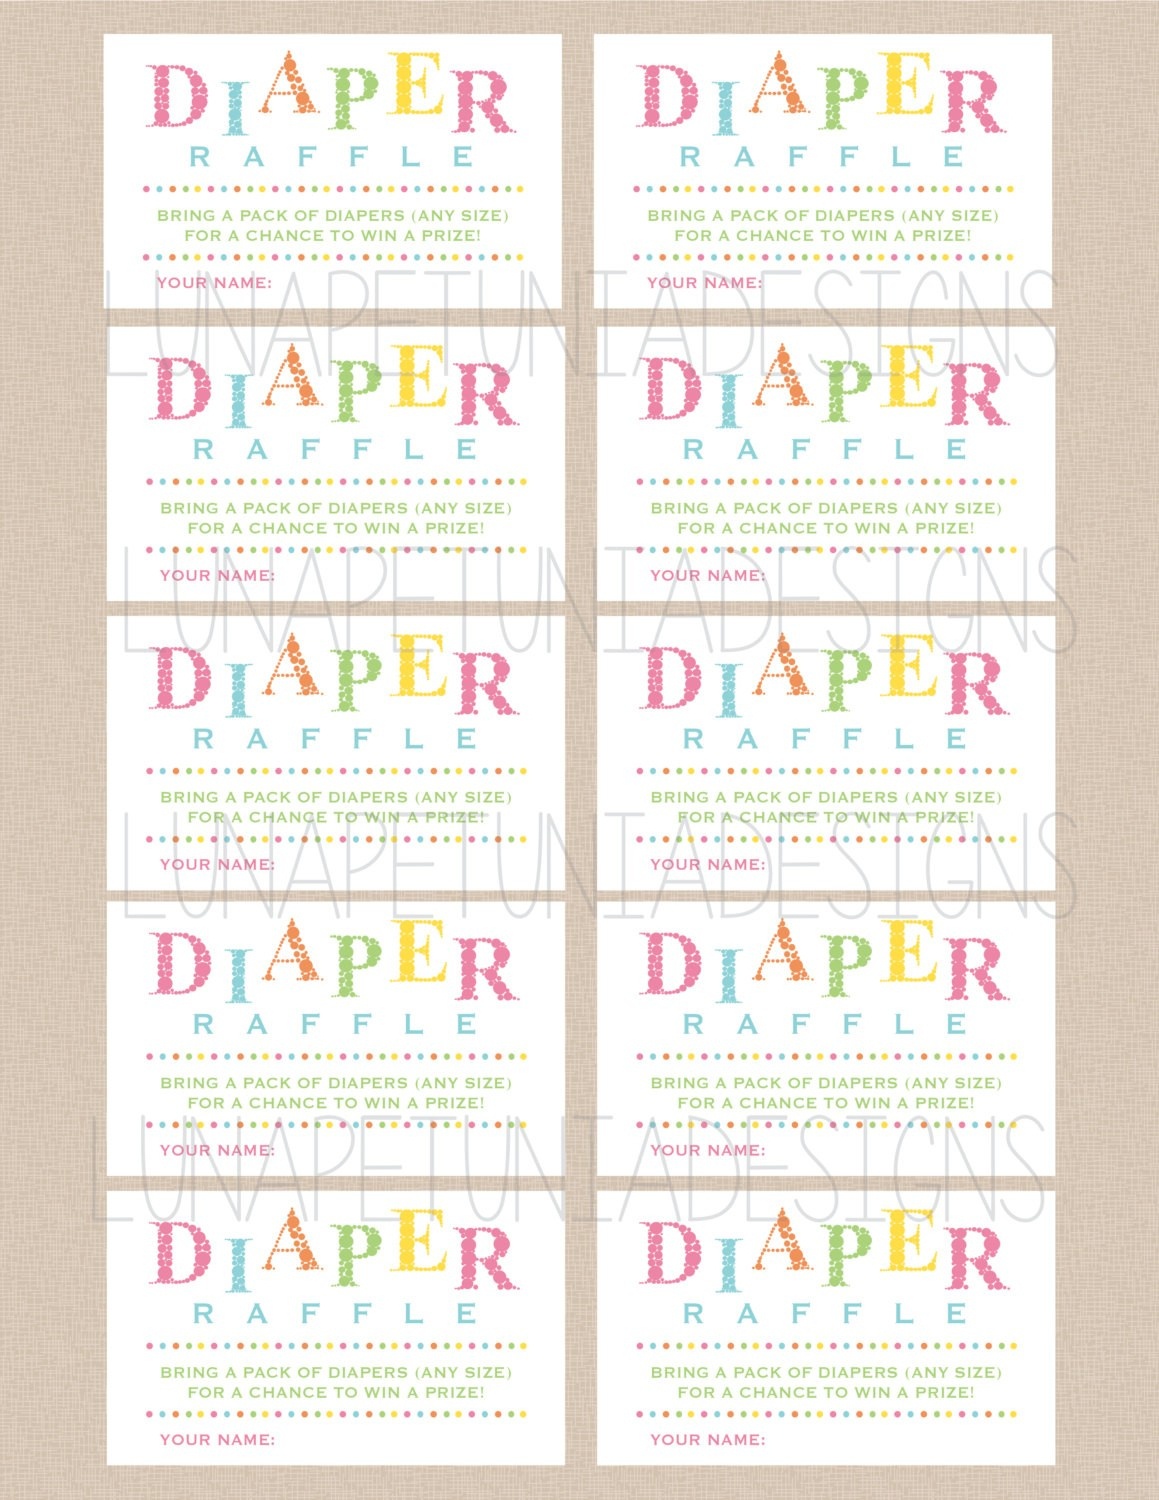 Review Free Printable Diaper Raffle Tickets For Baby Shower - Ideas - Free Printable Diaper Raffle Ticket Template